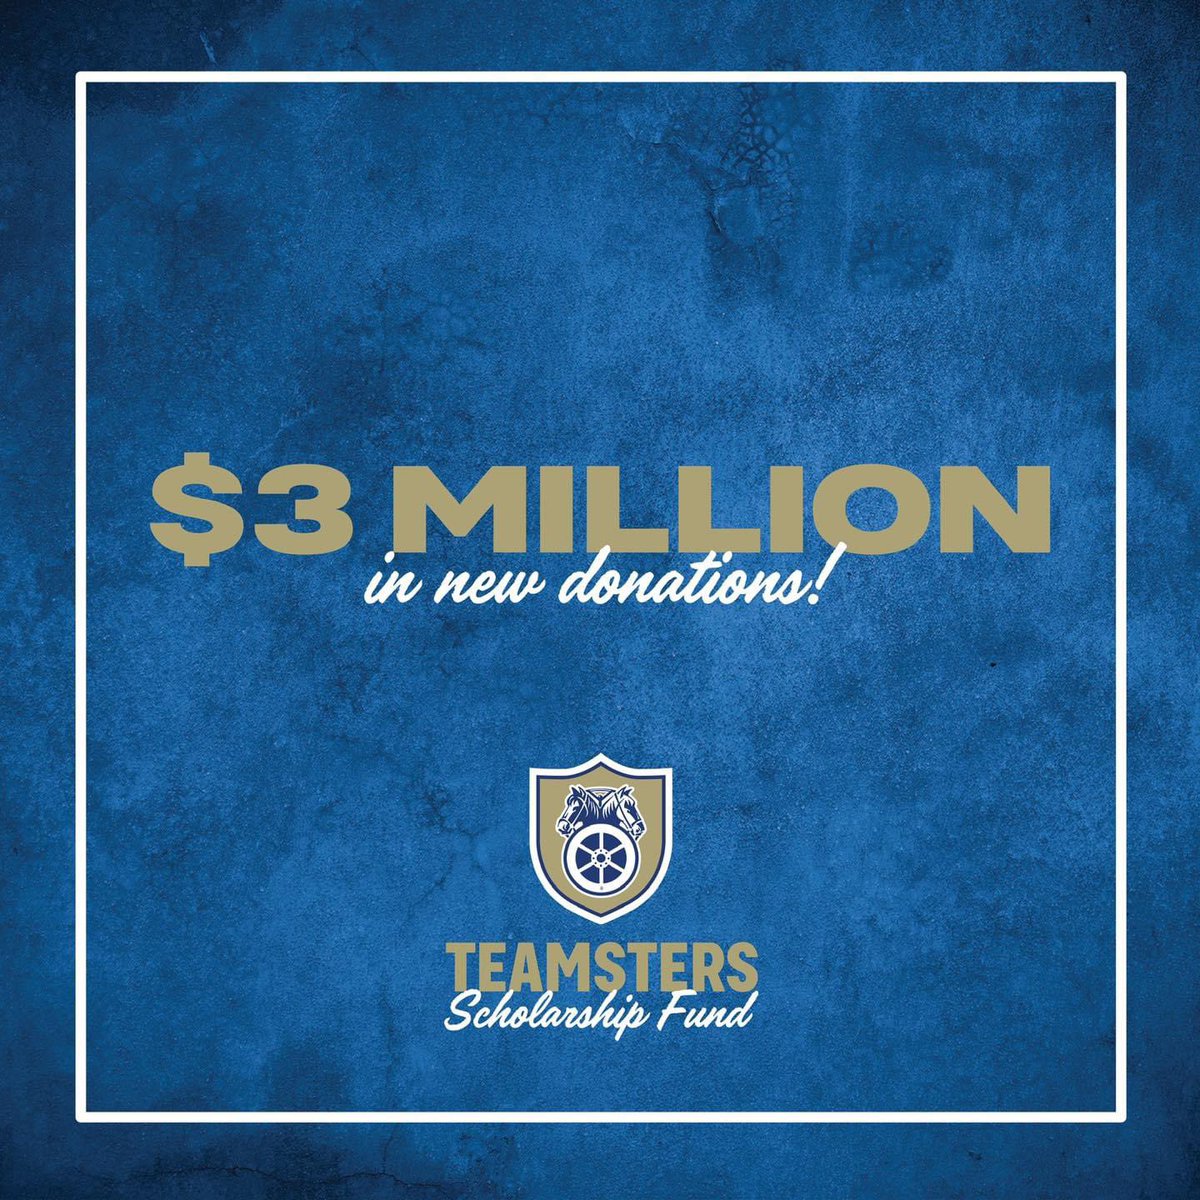 LOCAL UNIONS RAISE $3M FOR TEAMSTERS SCHOLARSHIP FUND Teamsters affiliates across the United States, Canada, and Puerto Rico came together on Saturday to raise another $3 million for the Teamsters Scholarship Fund, helping to deliver hundreds of new scholarships to the…